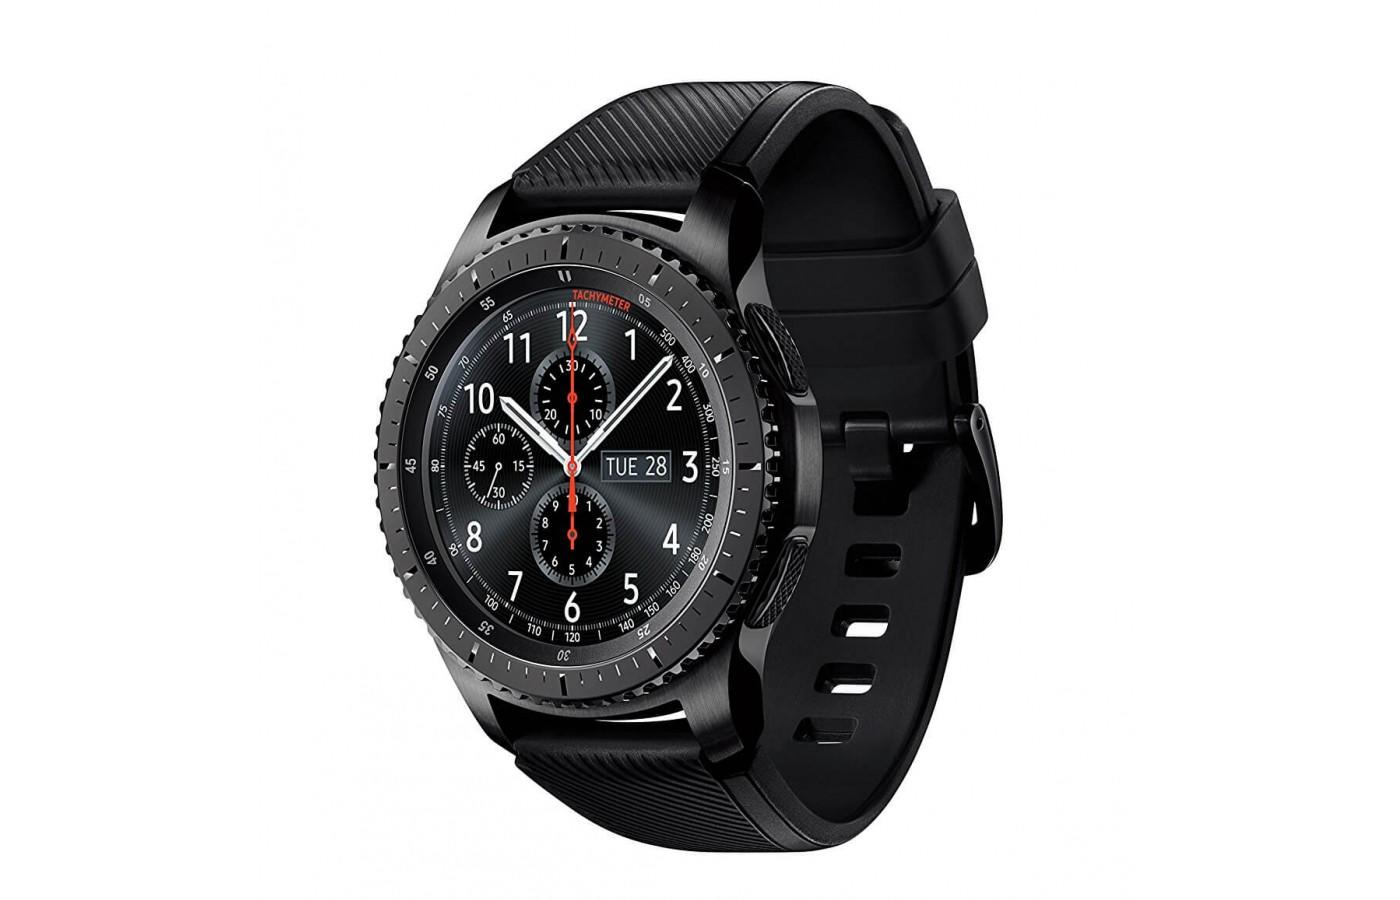 the Samsung Gear S3 Frontier shown from the front/side